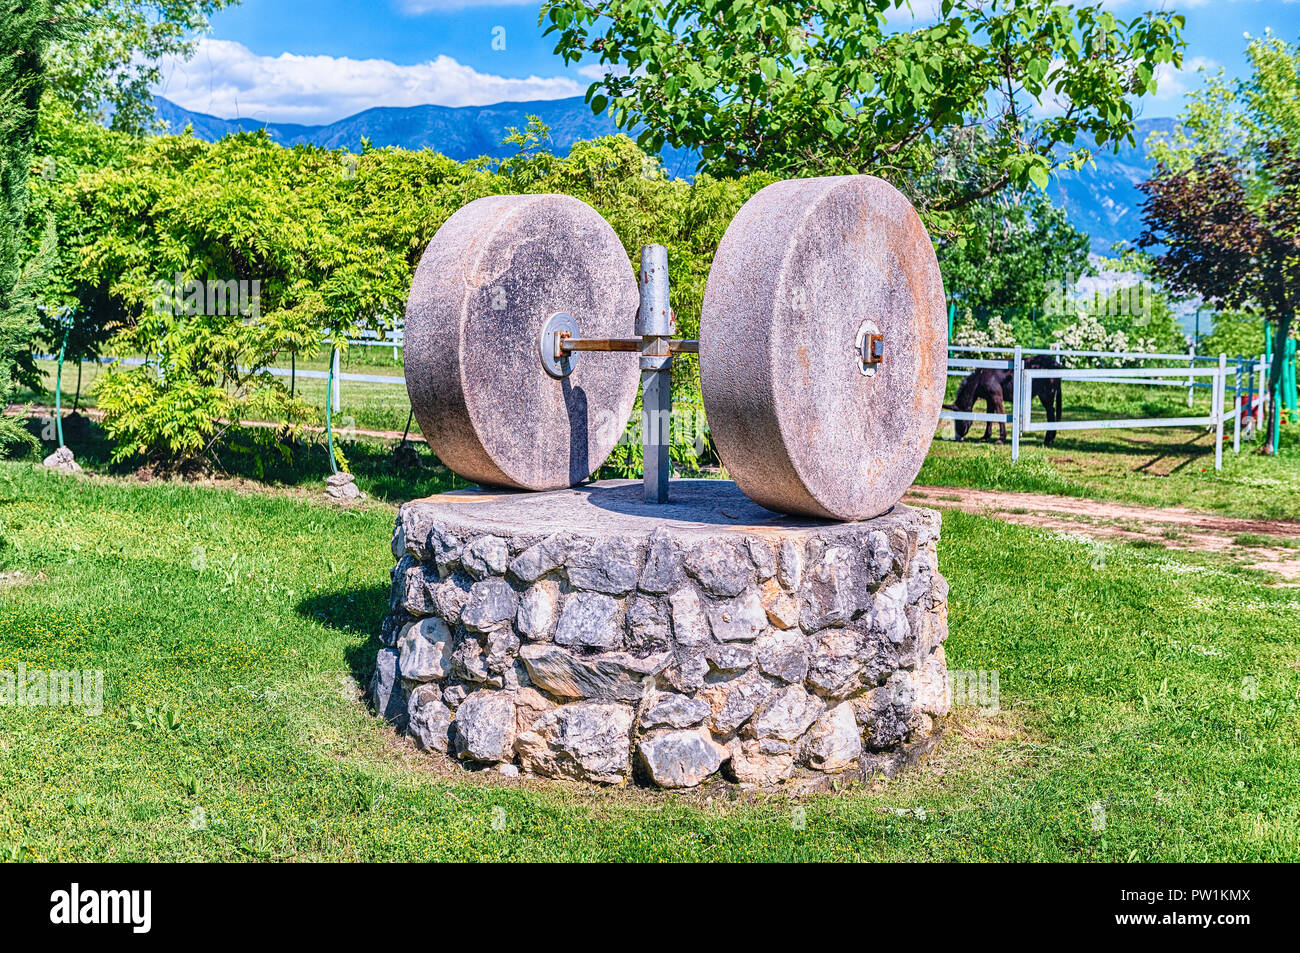 Ancient olive press with two millstones in the countryside Stock Photo